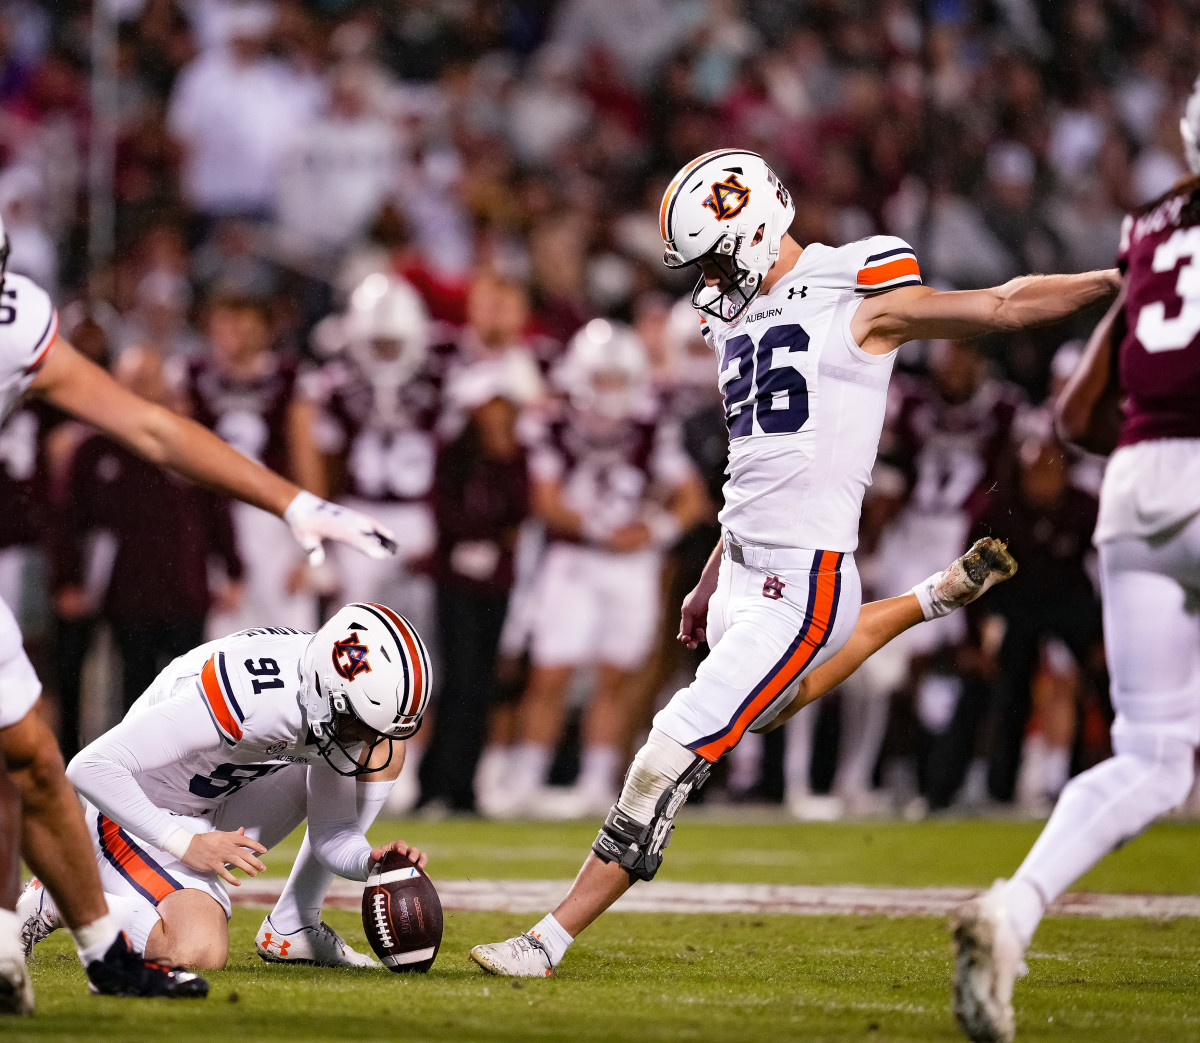 Nov 5, 2022; Starkville, MS, USA; Anders Carlson (26) kicks the field goal during the game between Auburn and Mississippi State at Davis Wade Stadium . Zach Bland/ AU Athletics